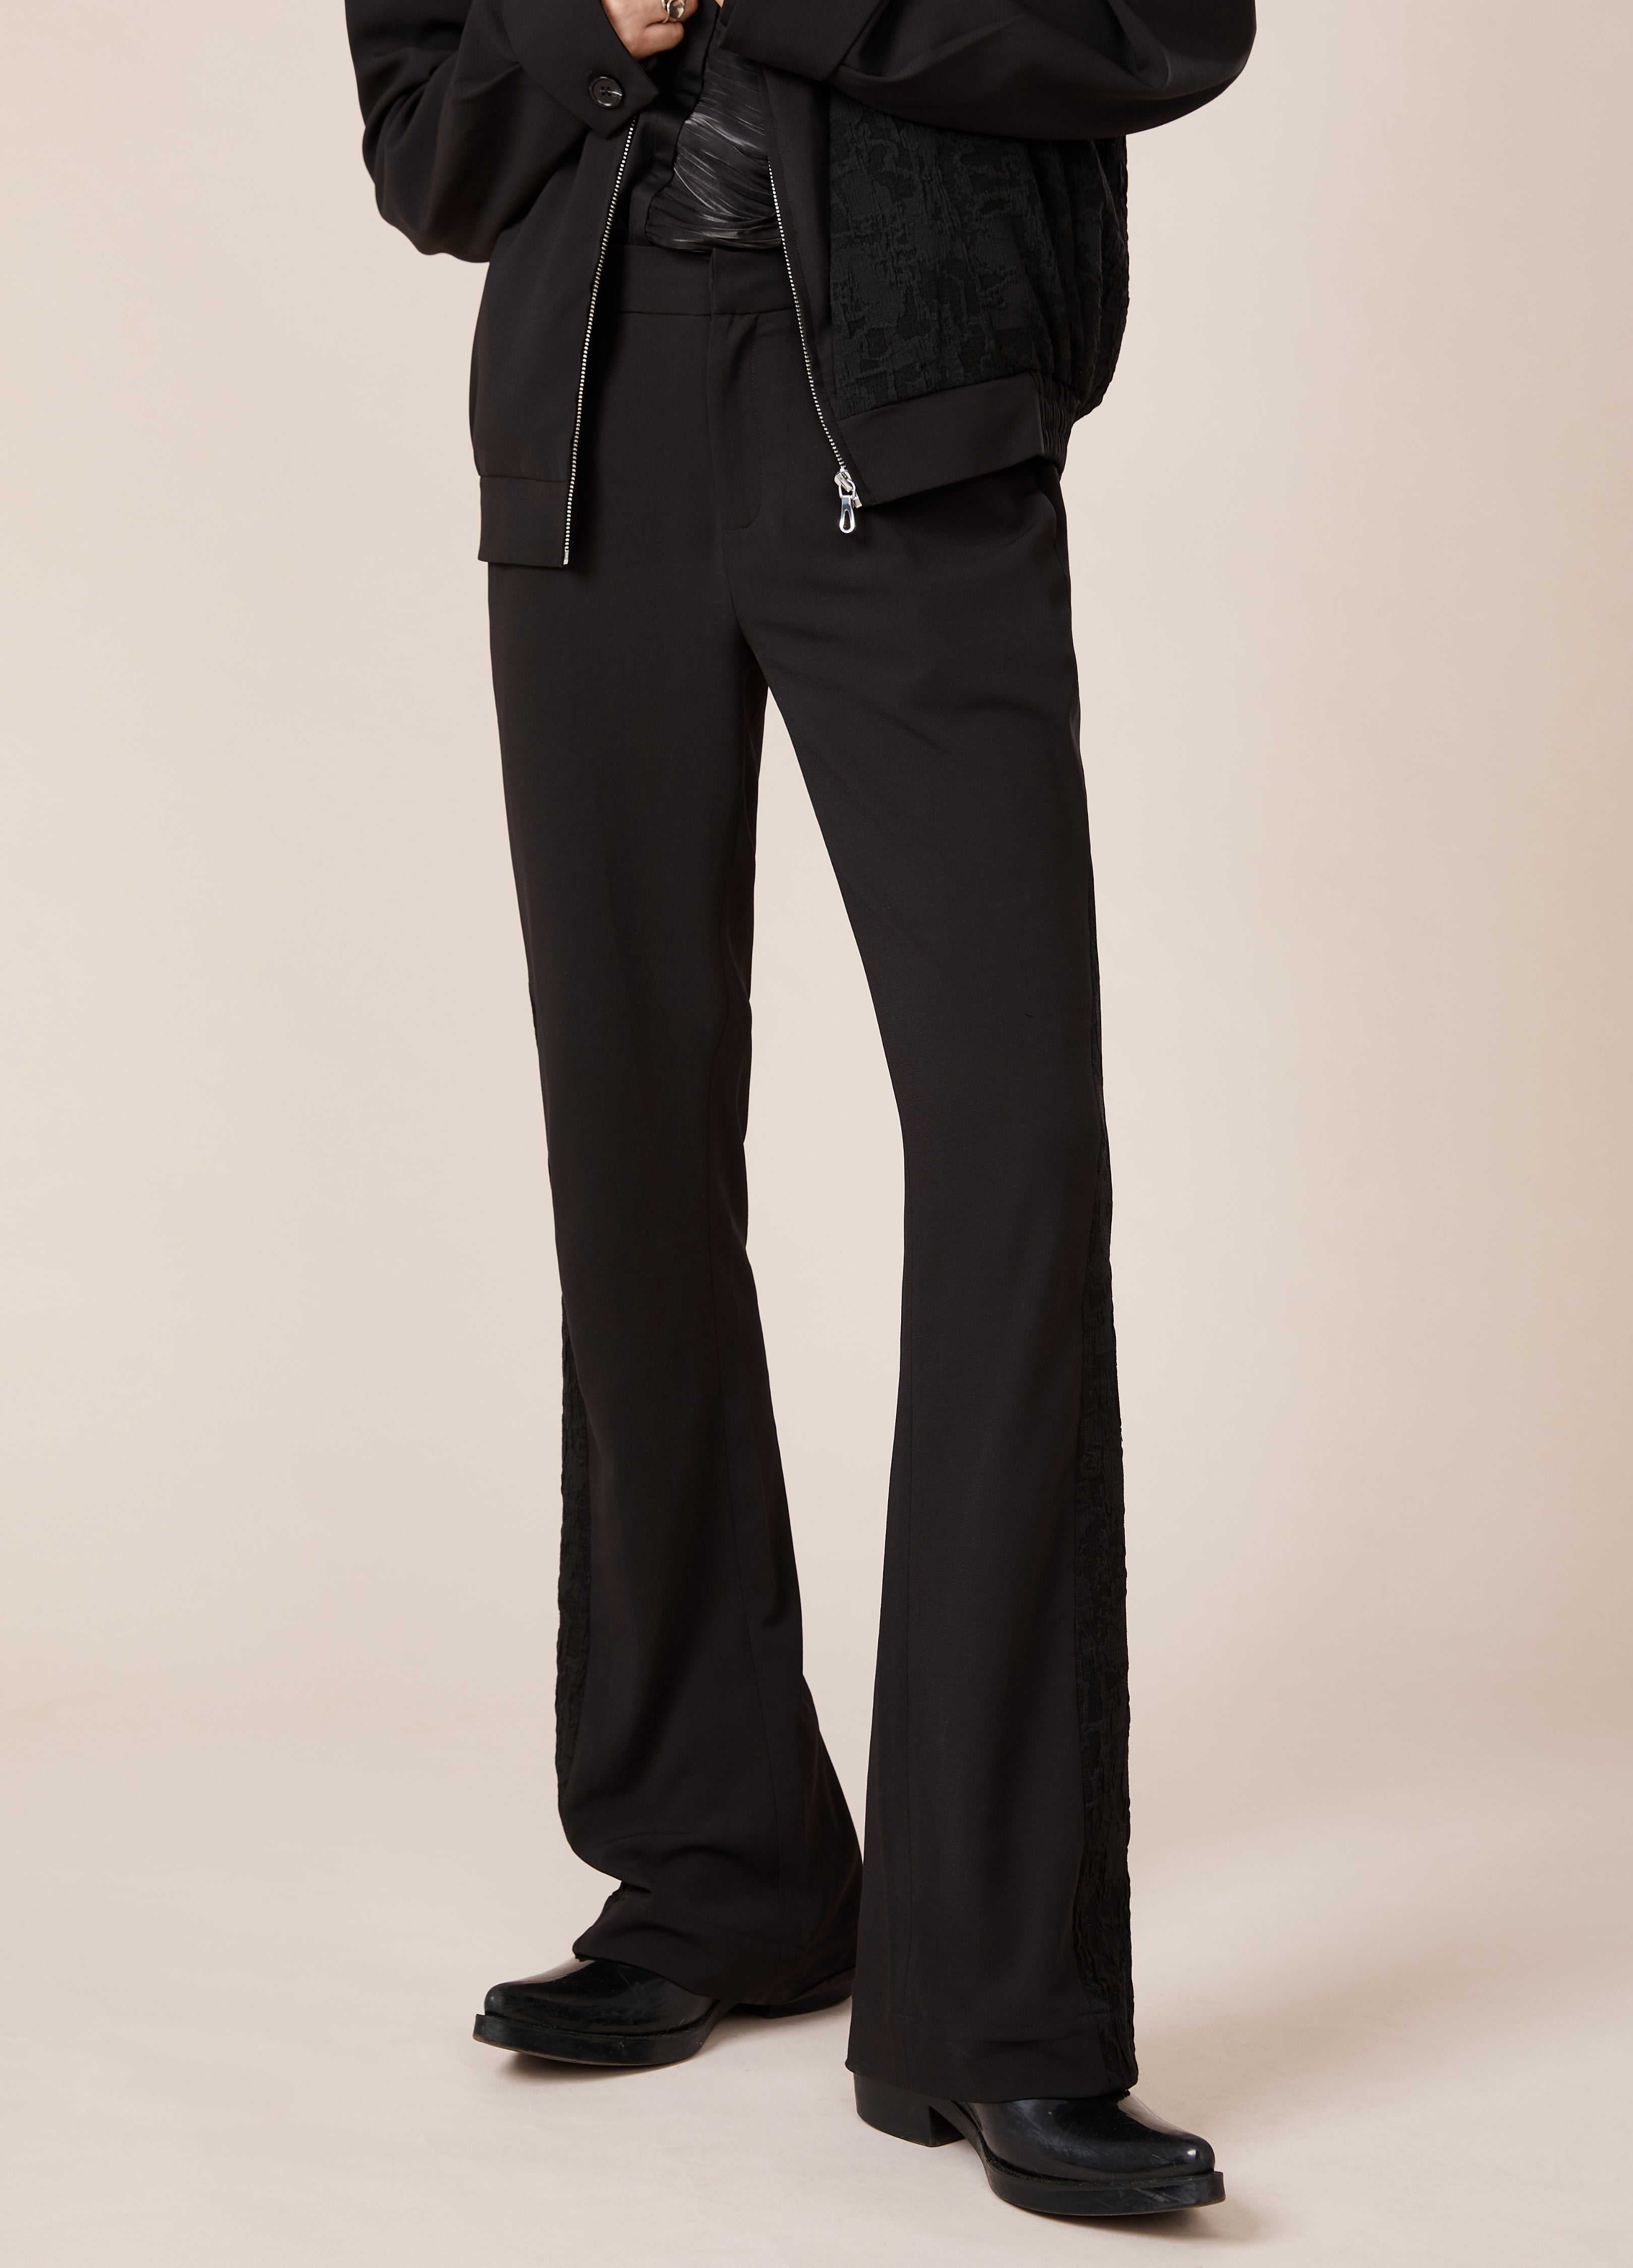 DP PARADIS 23AW ACETIC Flare Trousers